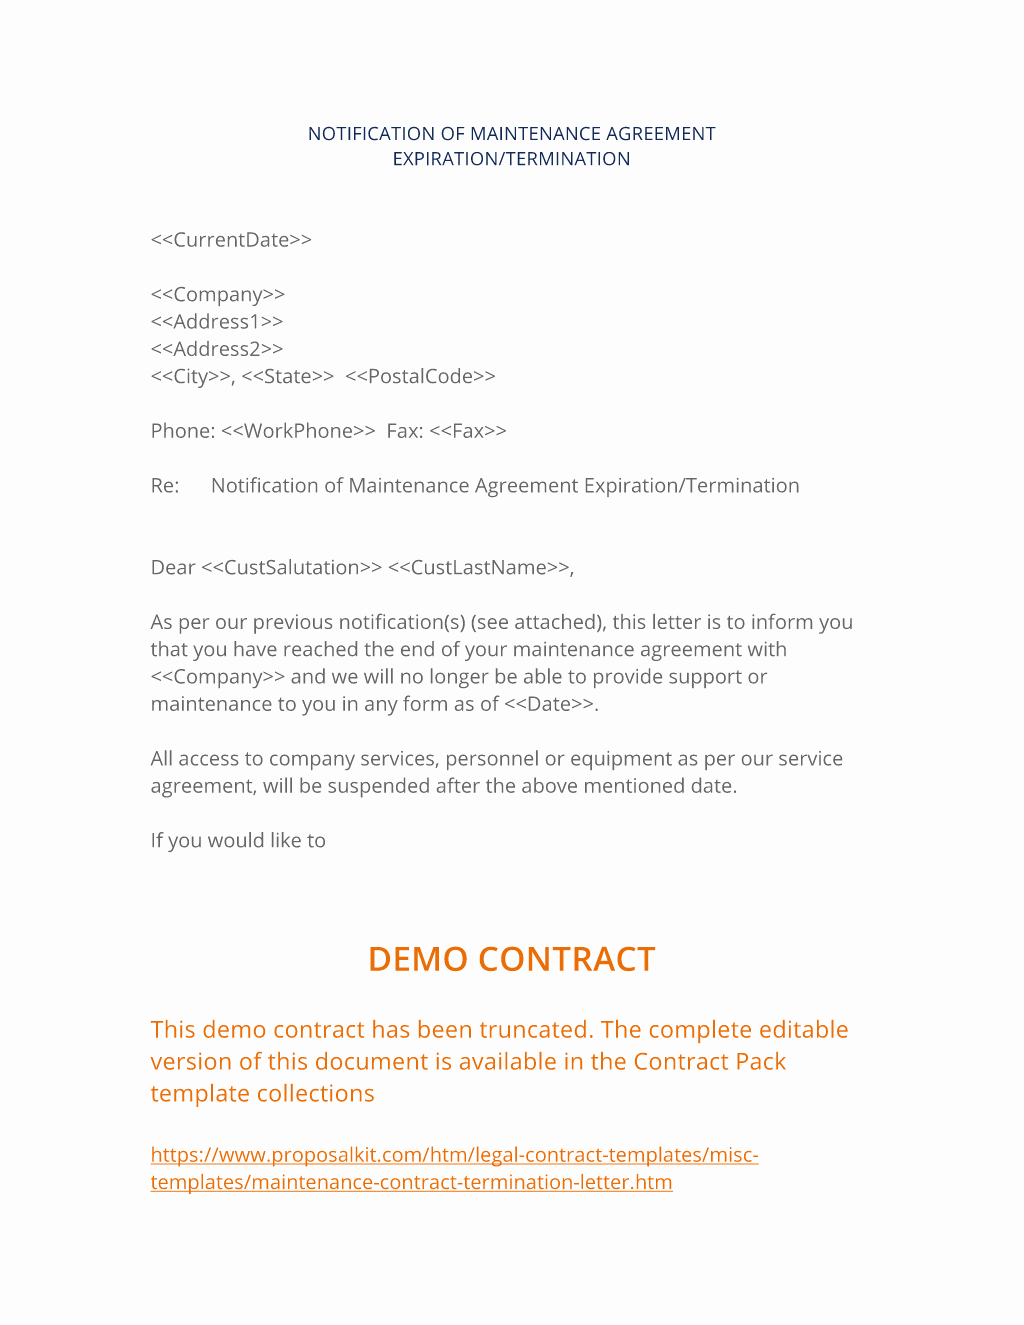 Letter Of Contract Termination Fresh Maintenance Contract Termination Letter 3 Easy Steps